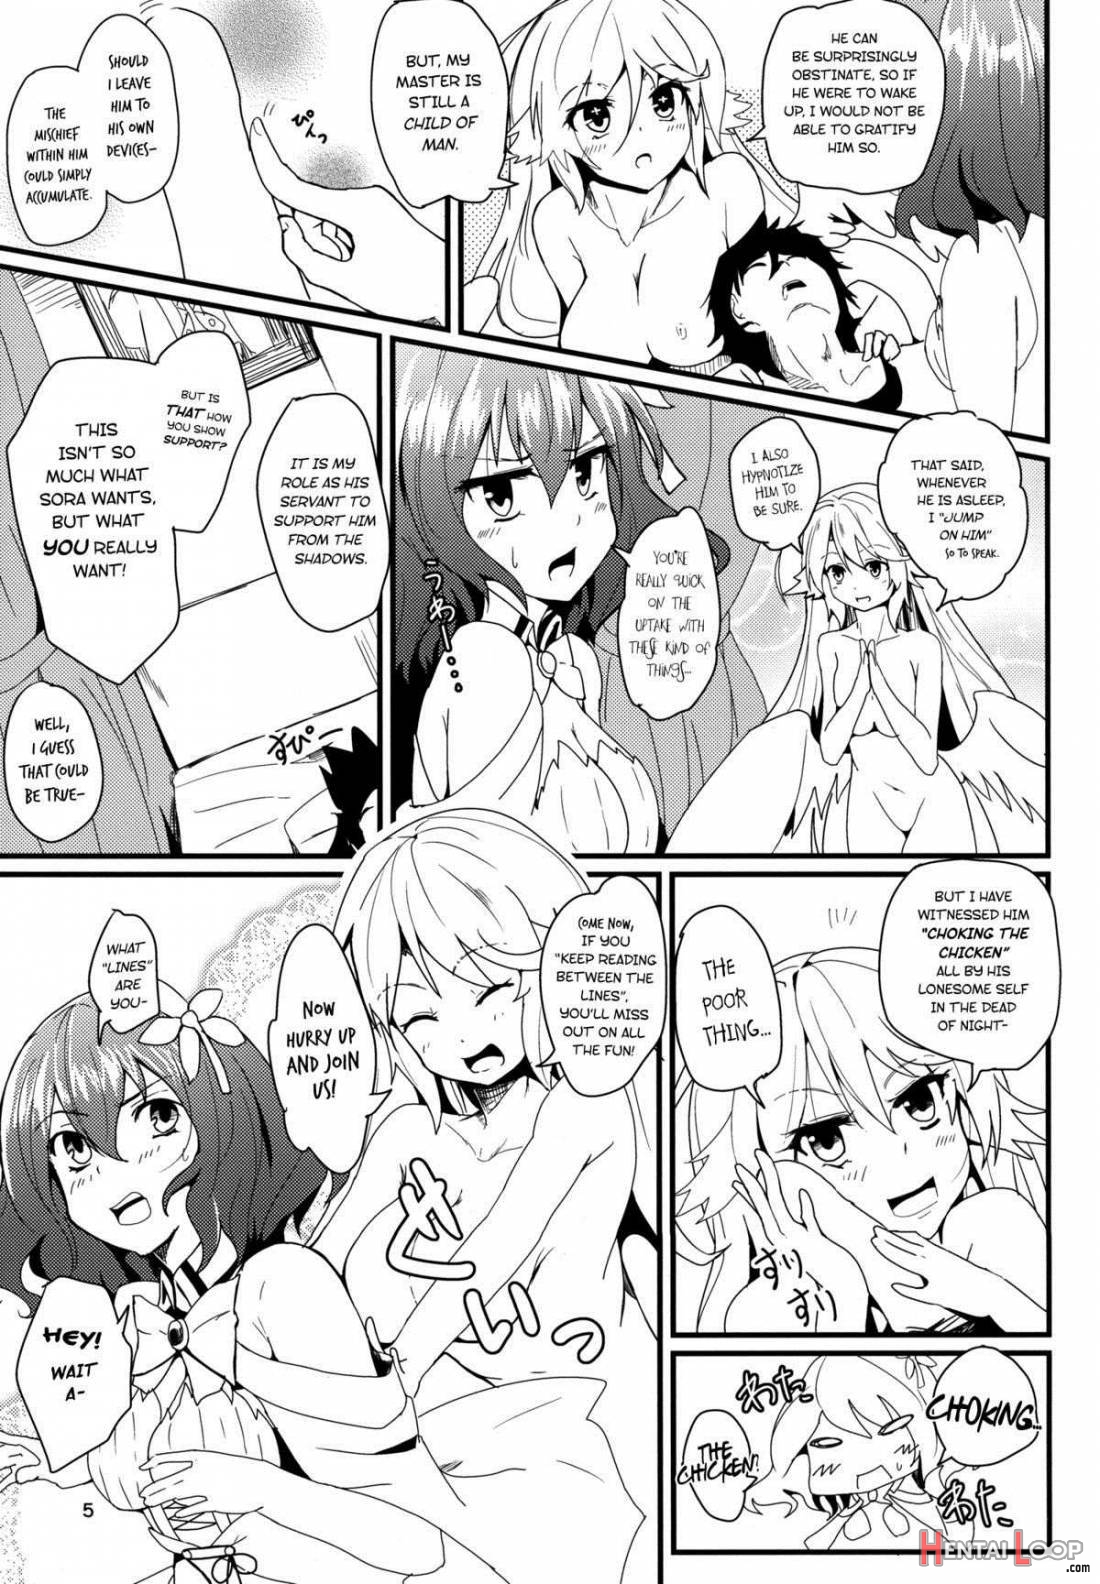 Jibril And Steph’s Attempts At Service page 4